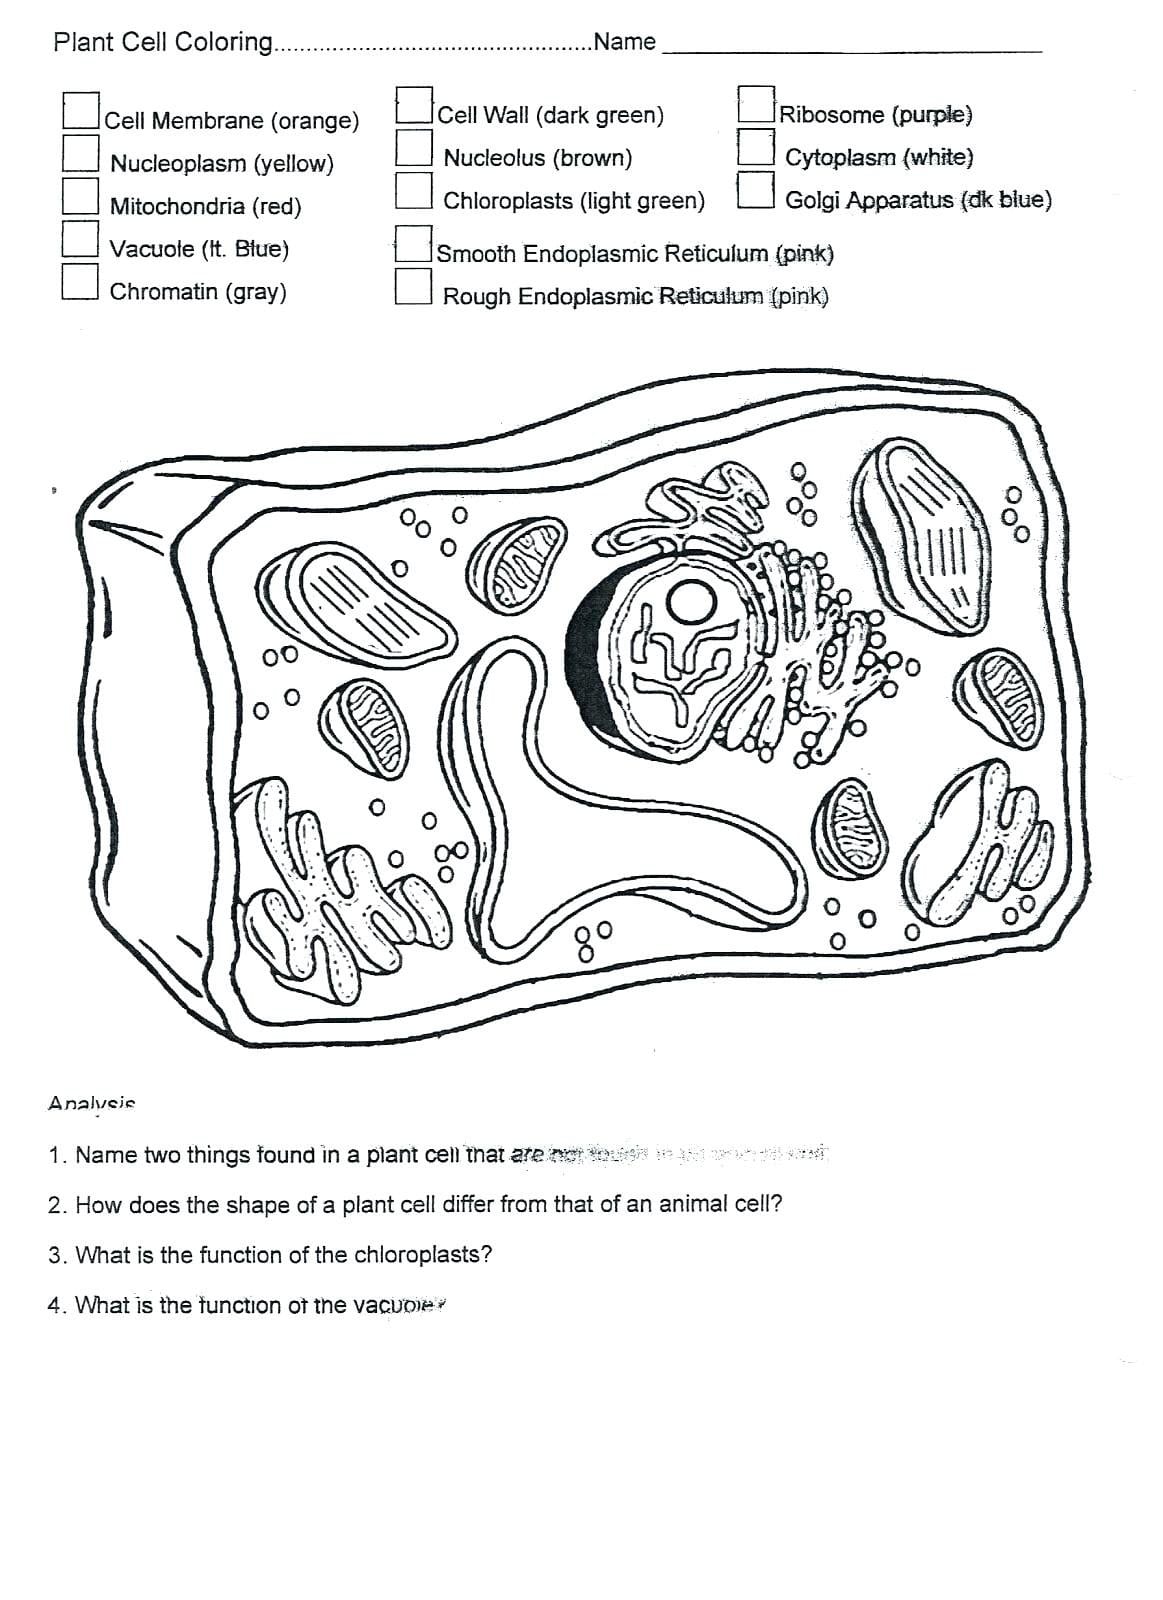 Coloring  Animal Cell Coloring Sheet Answer Key In Plant Also Plant Cell Worksheet Answers